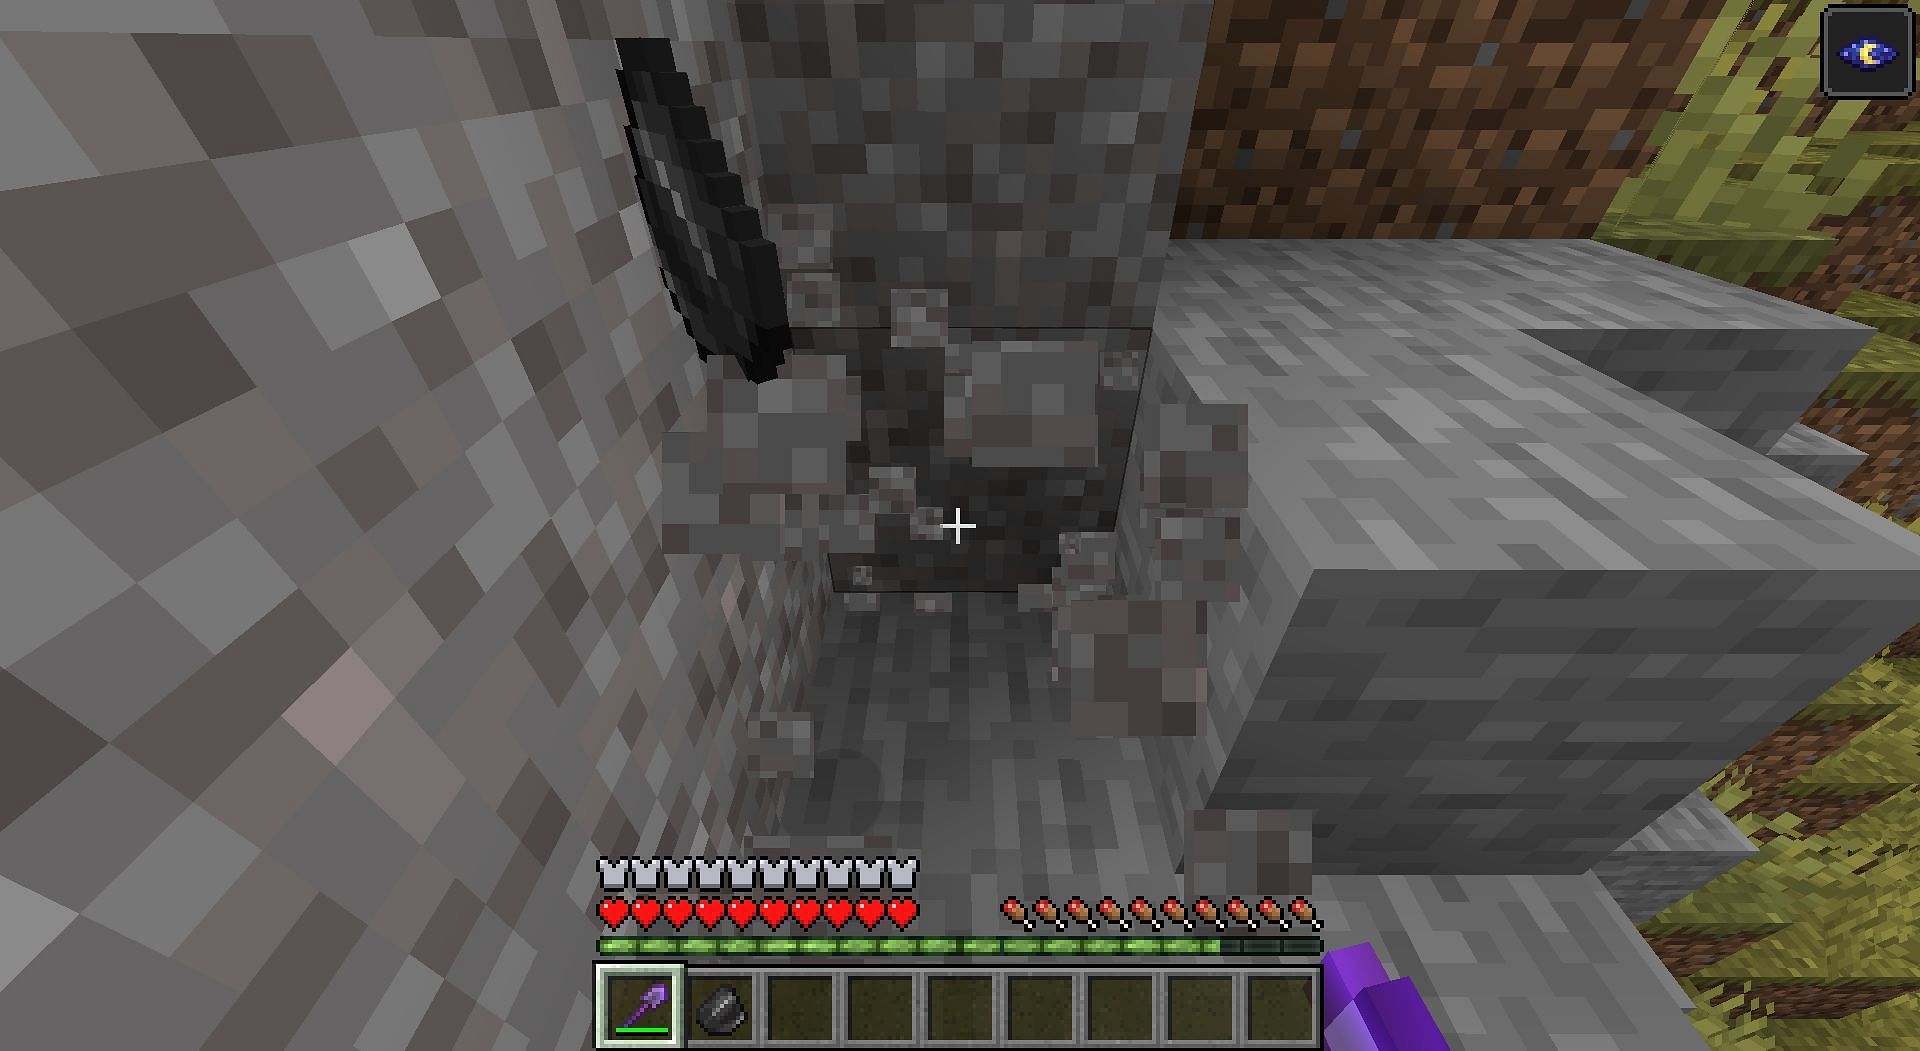 Fortune 3 enchanted shovel will have a 100% chance of dropping the item (Image via Minecraft 1.18)